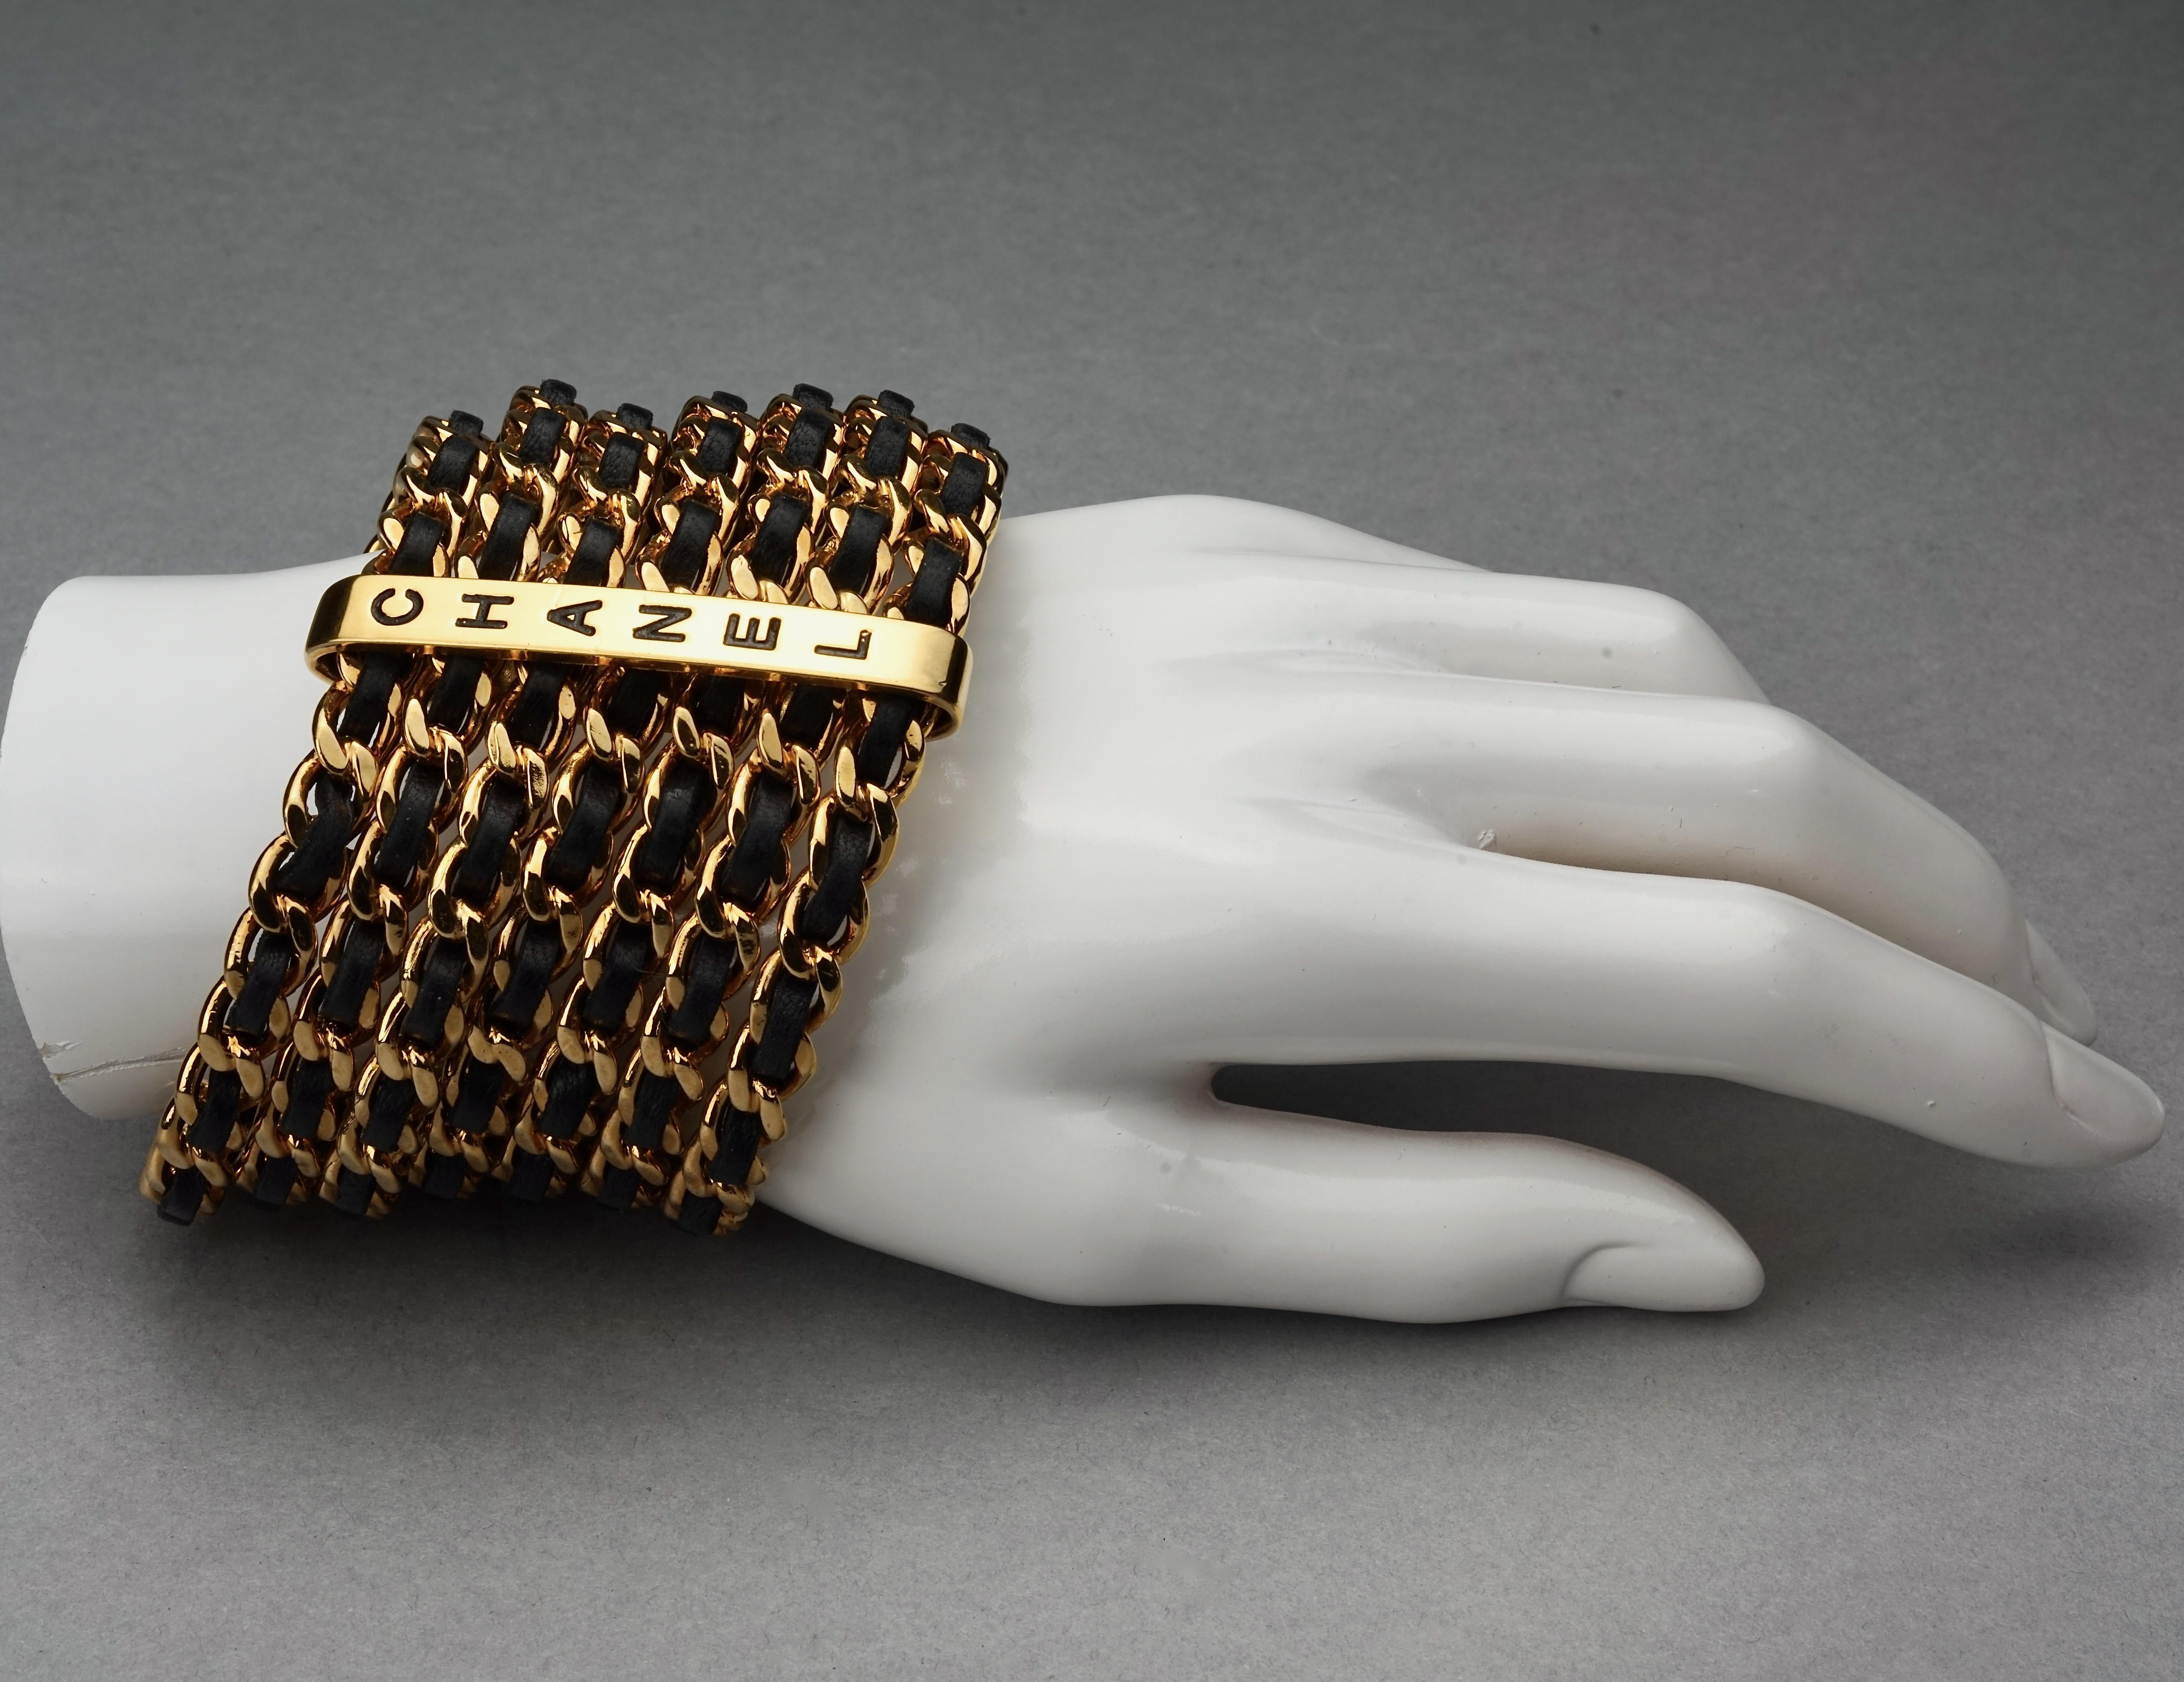 Vintage 1993 CHANEL 7 Stacked Bangles Chain Leather Wide Cuff Bracelet

Measurements:
Height: 2.24 inches (5.7 cm)
Inner Circumference: 7.75 inches (19.7 cm)

Features:
- 100% Authentic CHANEL.
- & stacked bangles in chain and black leather.
- Gold